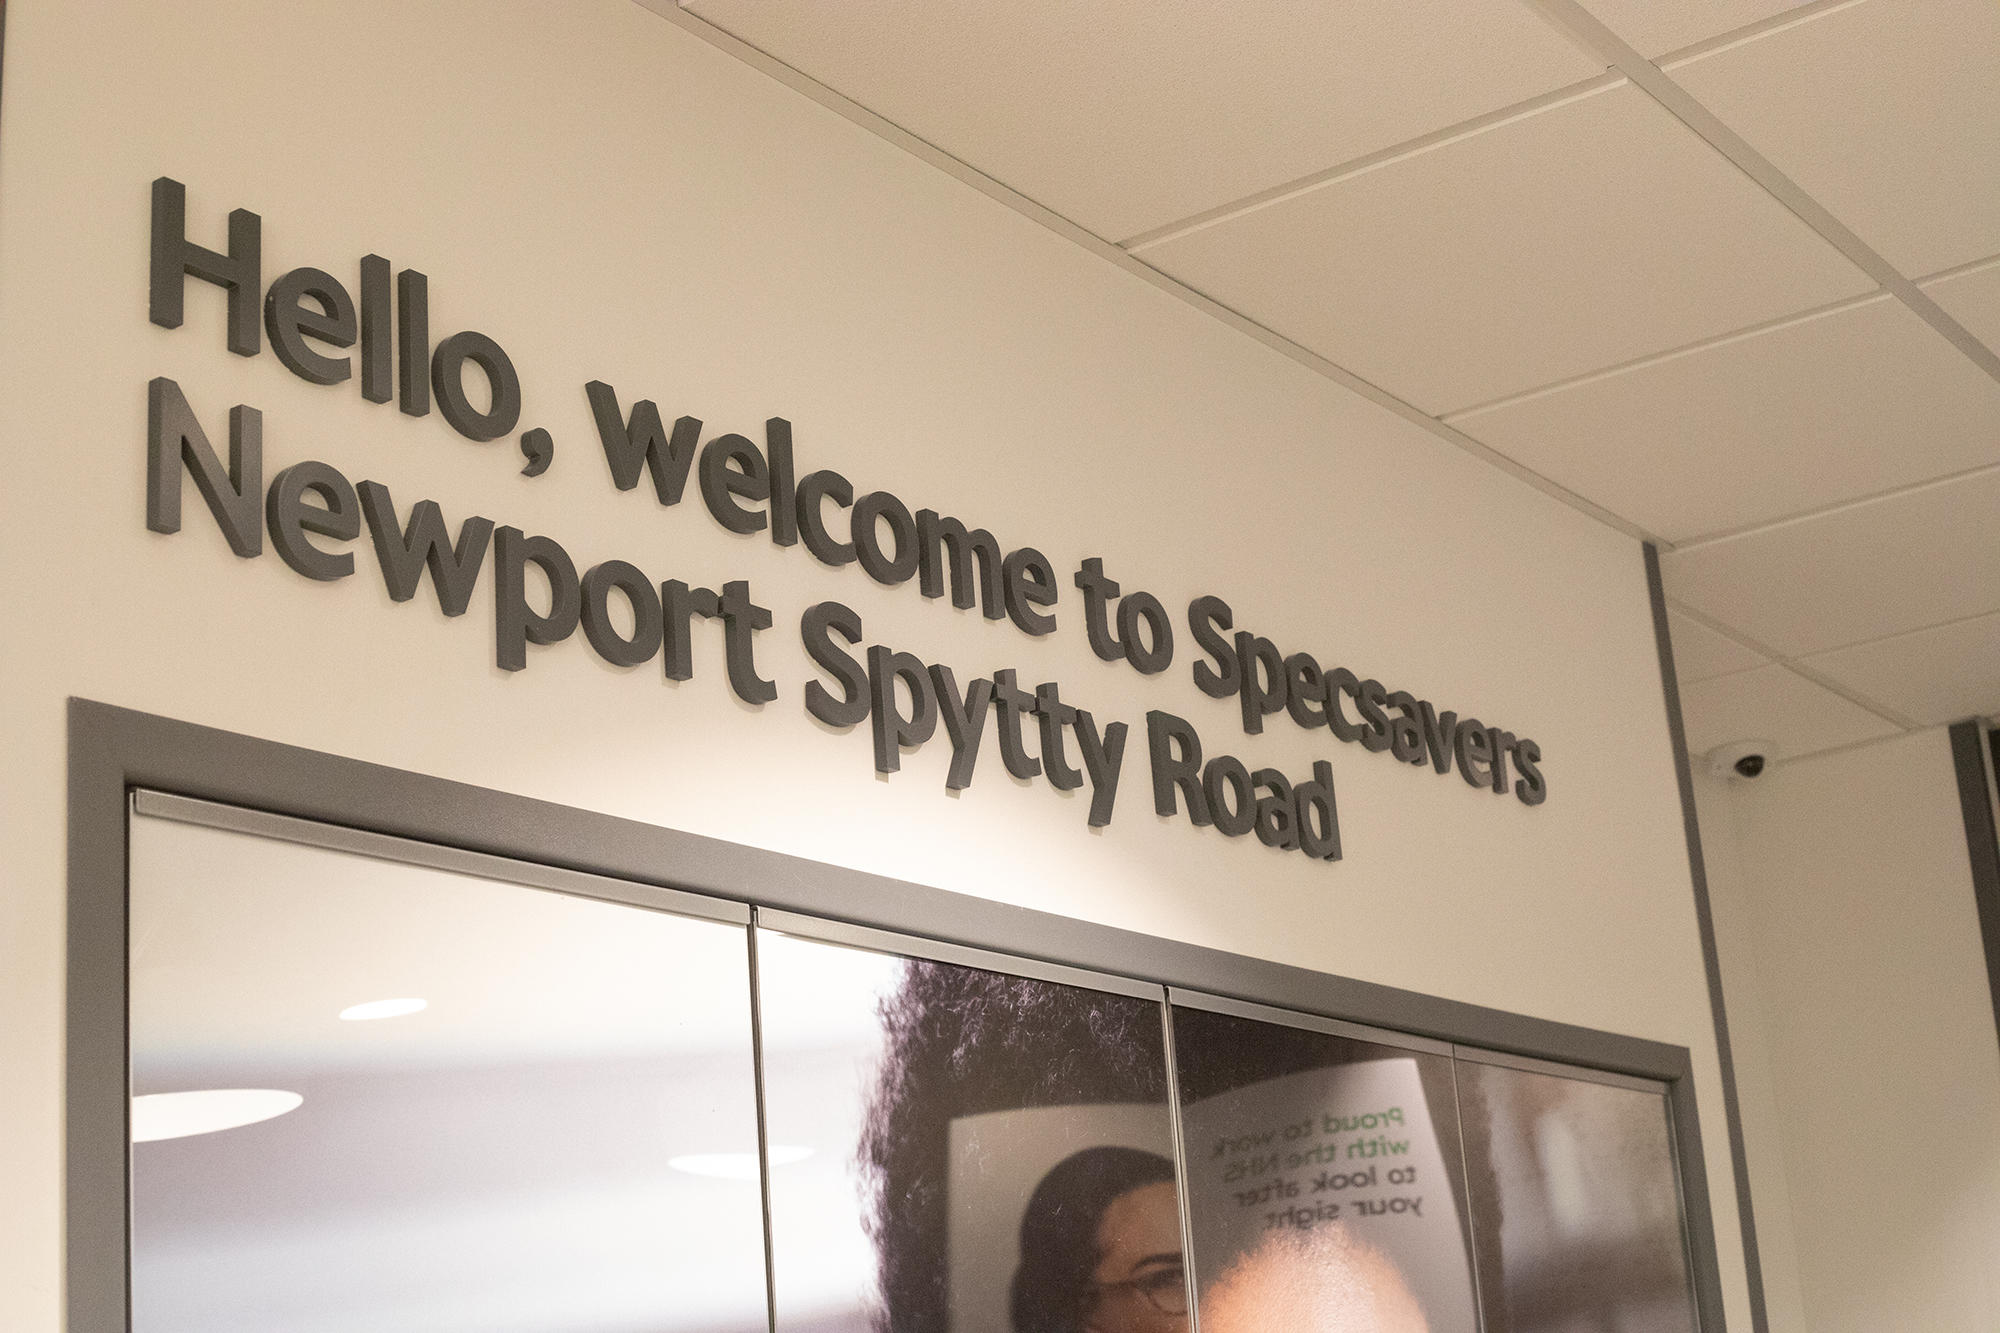 Newport - Spytty Road Specsavers Specsavers Opticians and Audiologists - Spytty Road Newport 01633 284000